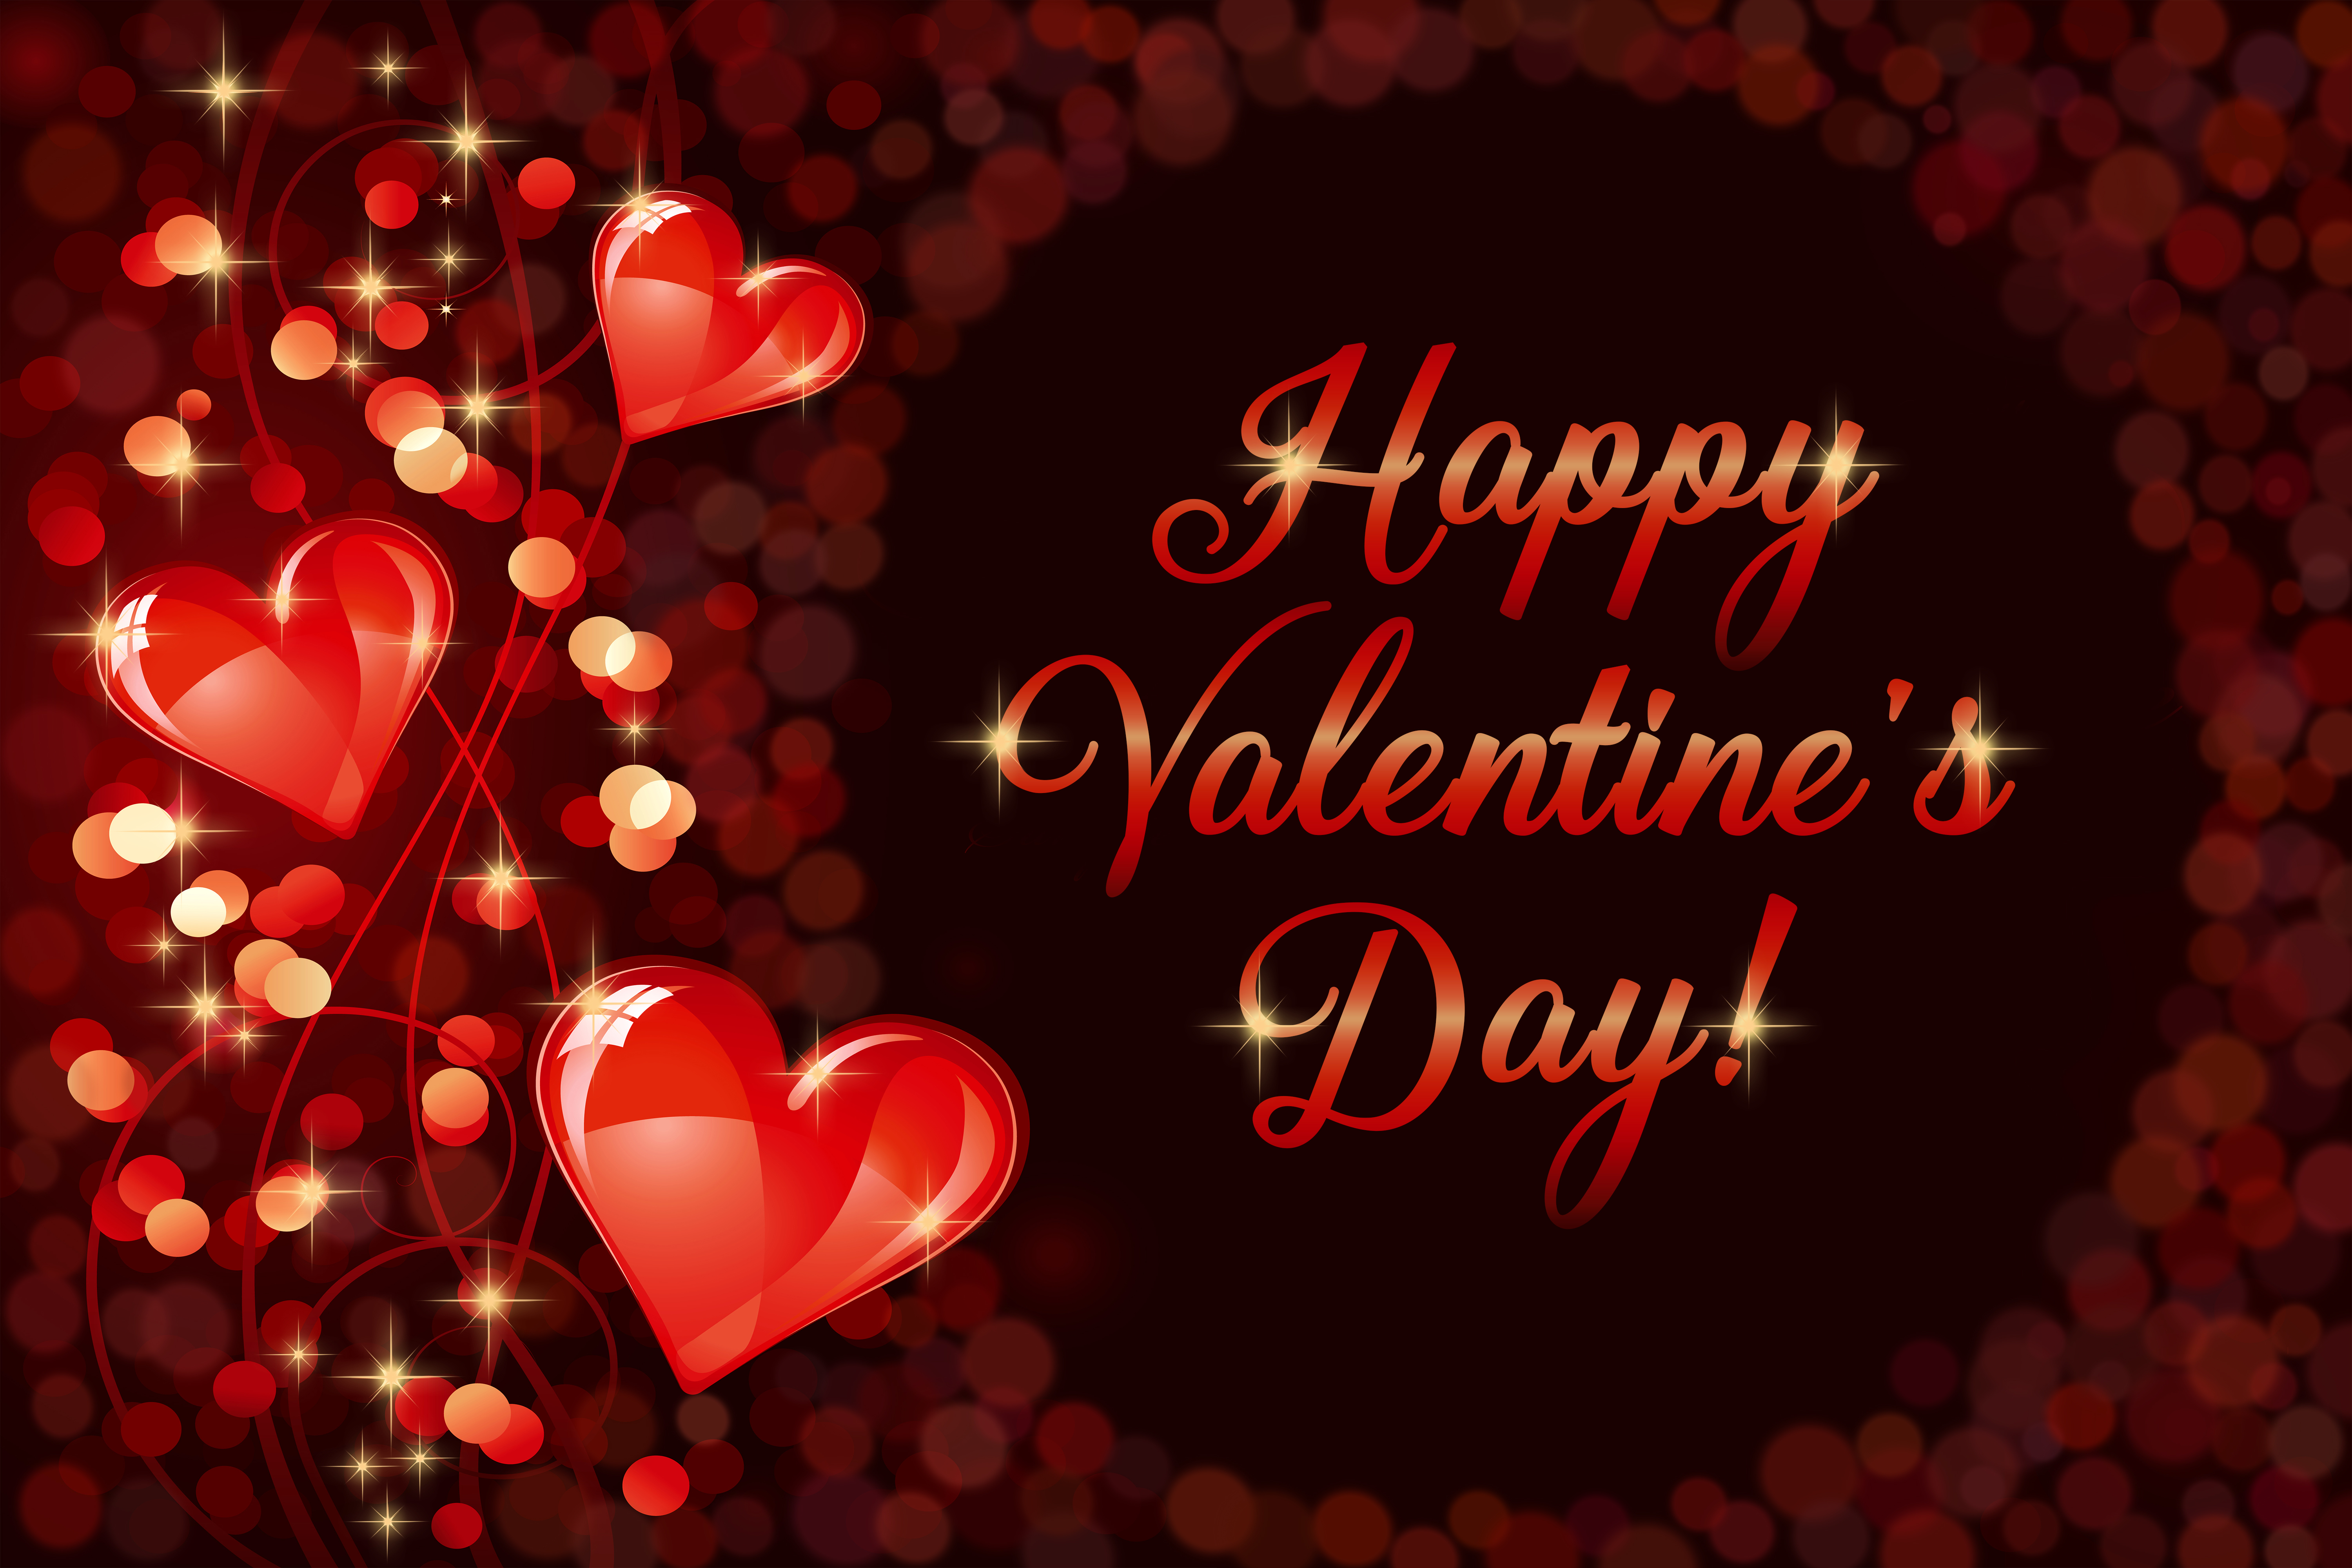 280+ 4K Valentine's Day Wallpapers | Background Images